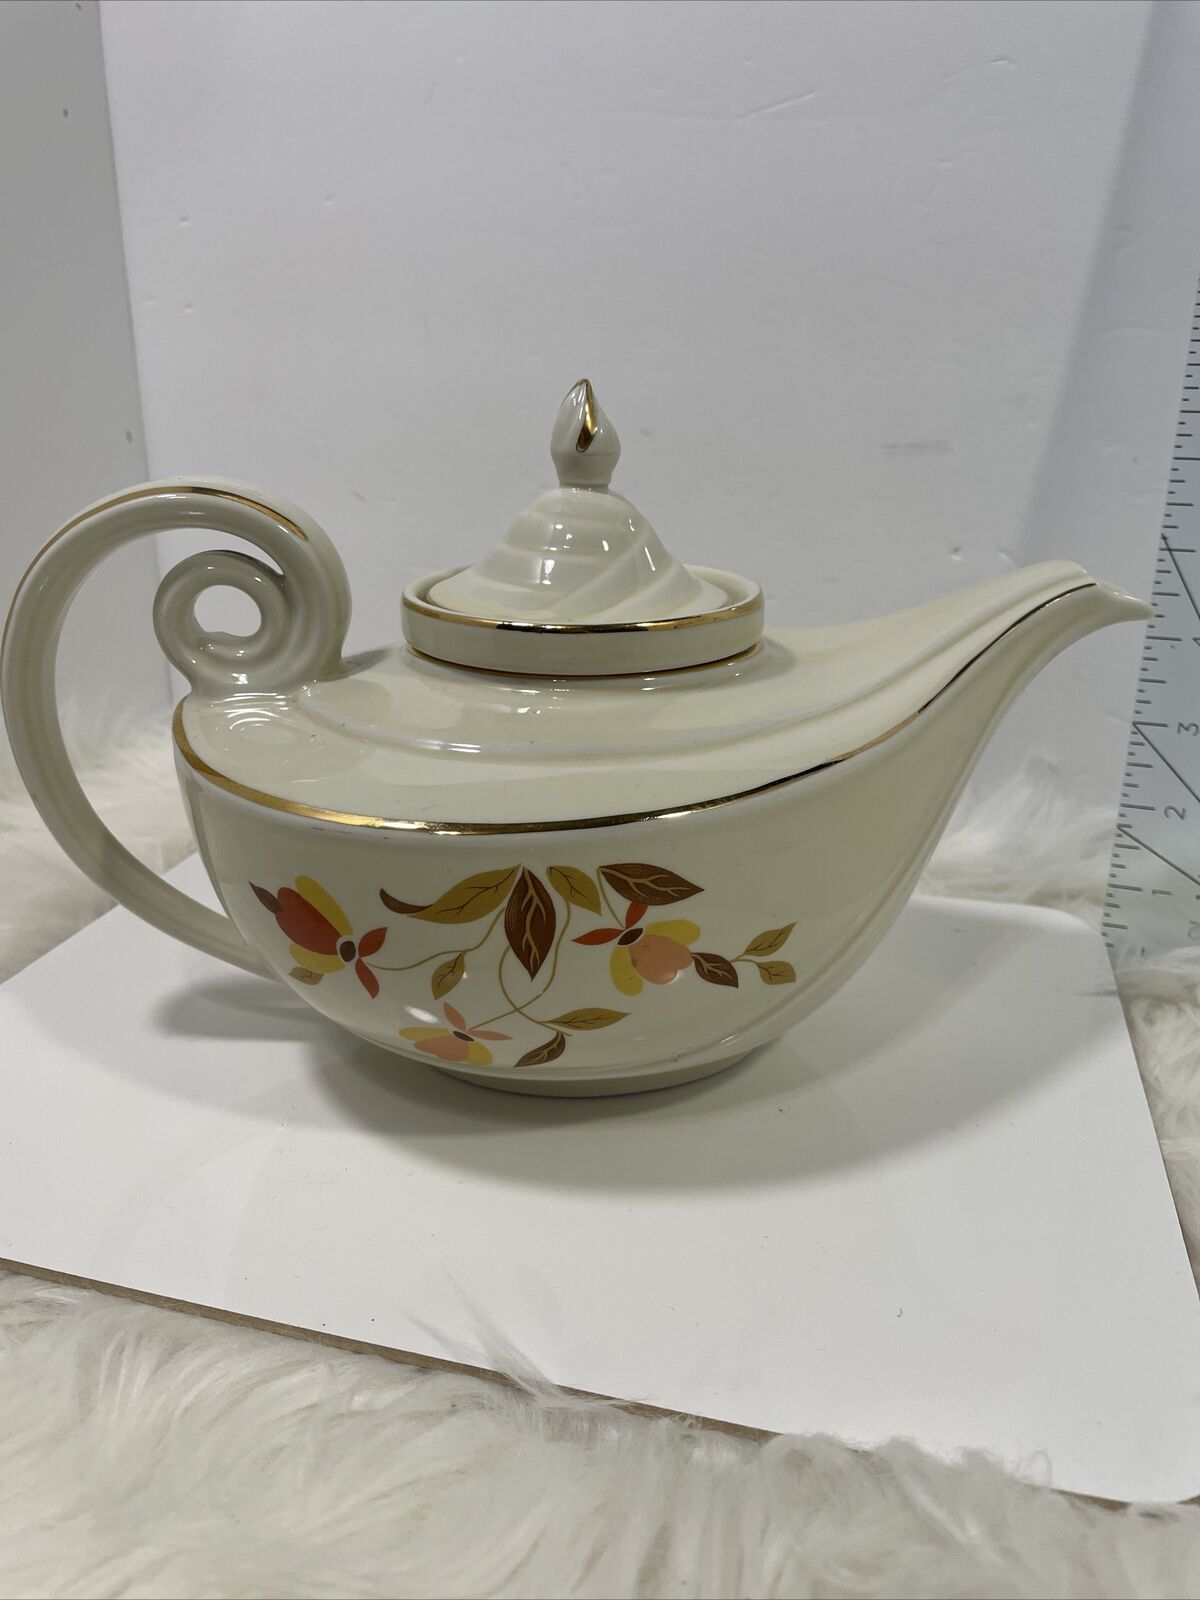 Hall\'s Superior Kitchenware Autumn Leaf Teapot With Insert Spots In Glaze Seepic